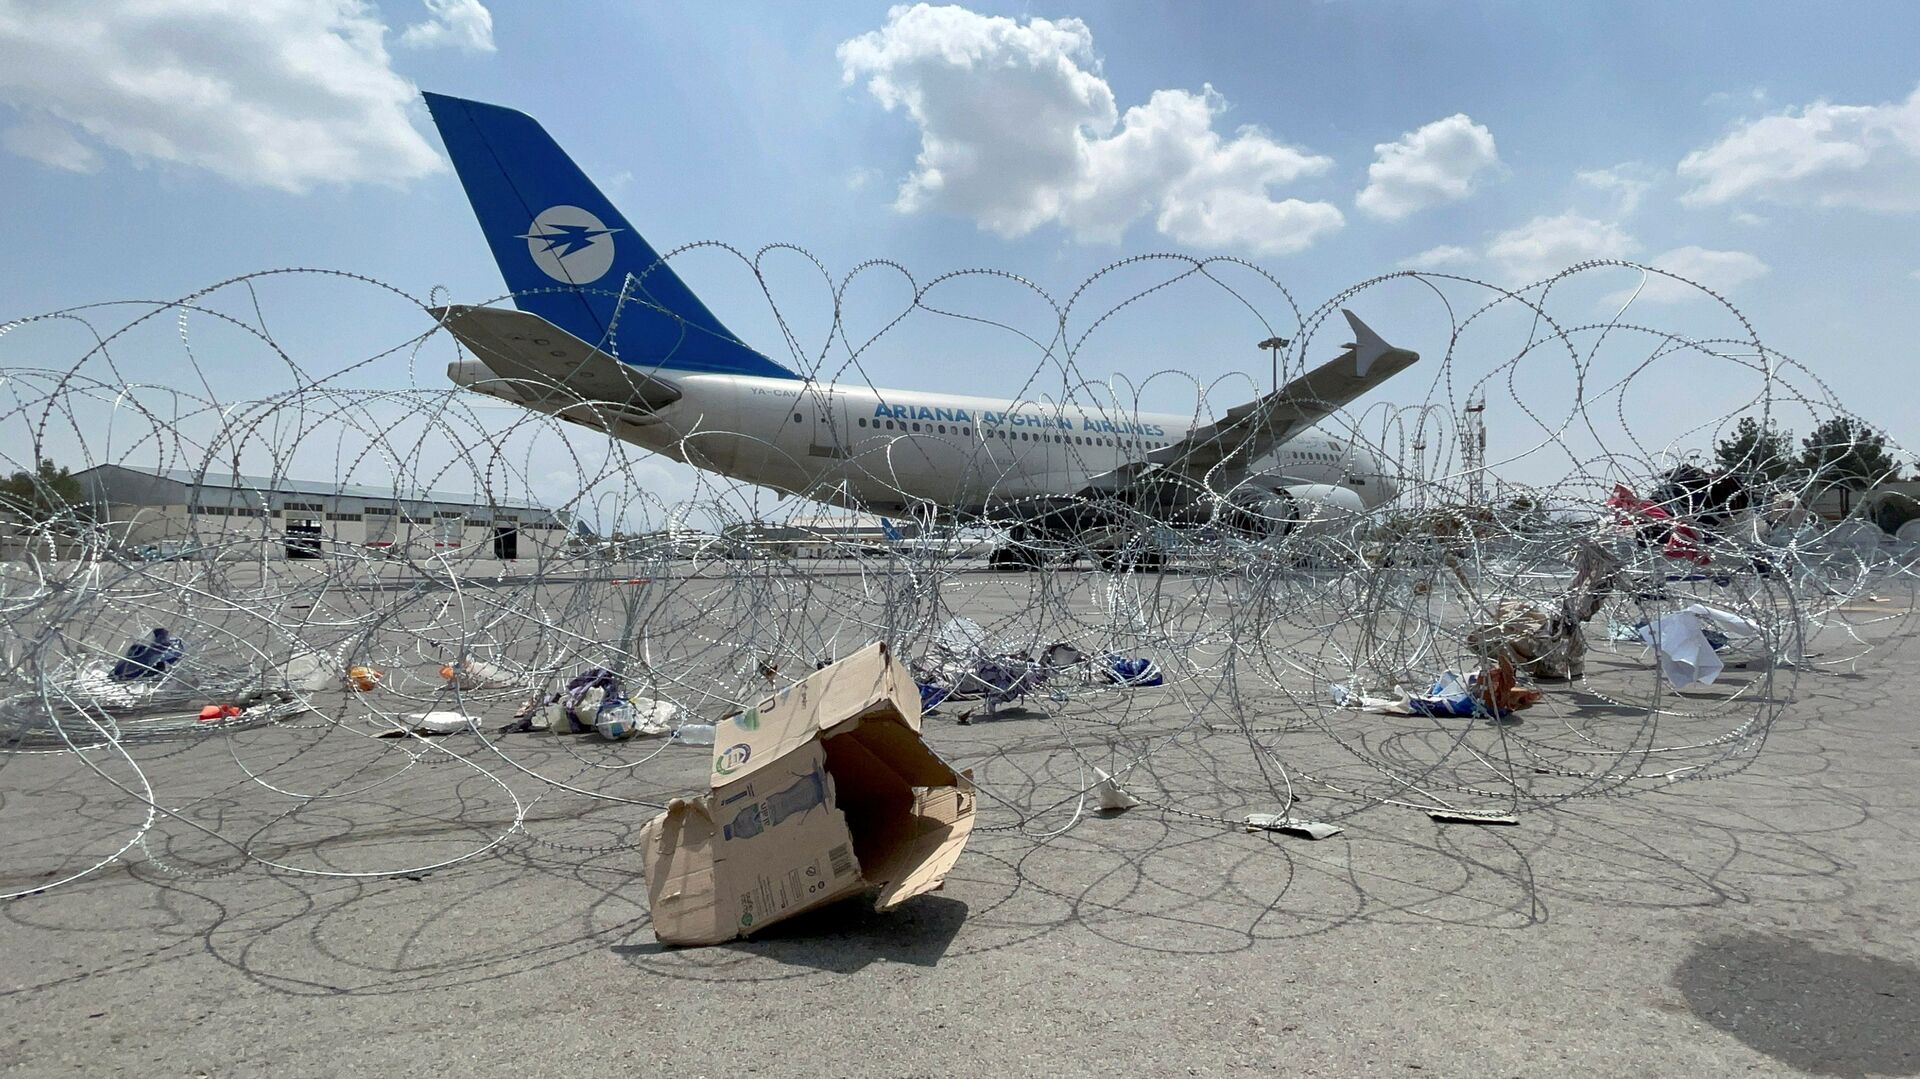 A commercial airplane is seen at the Hamid Karzai International Airport a day after U.S troops withdrawal in Kabul, Afghanistan August 31, 2021 - Sputnik International, 1920, 13.12.2021